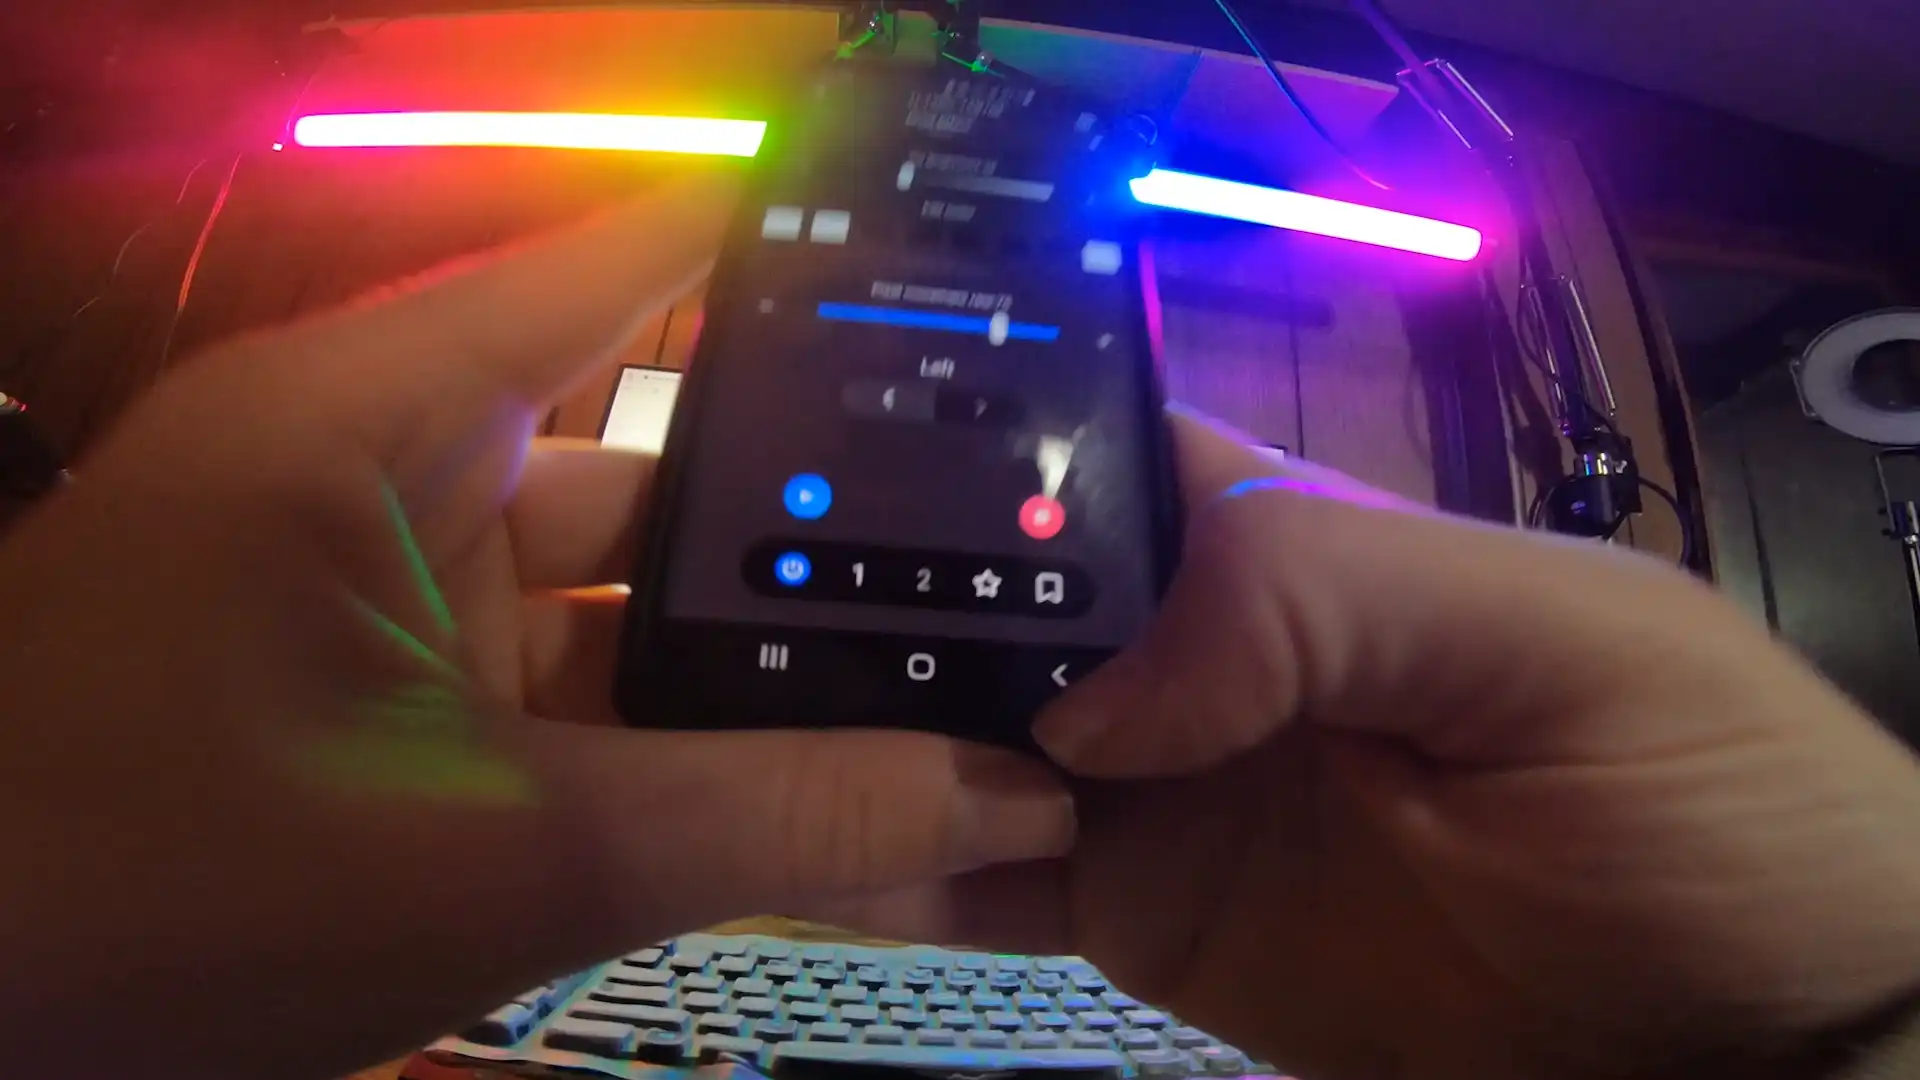 Hand holding smartphone with colorful LED light control app.